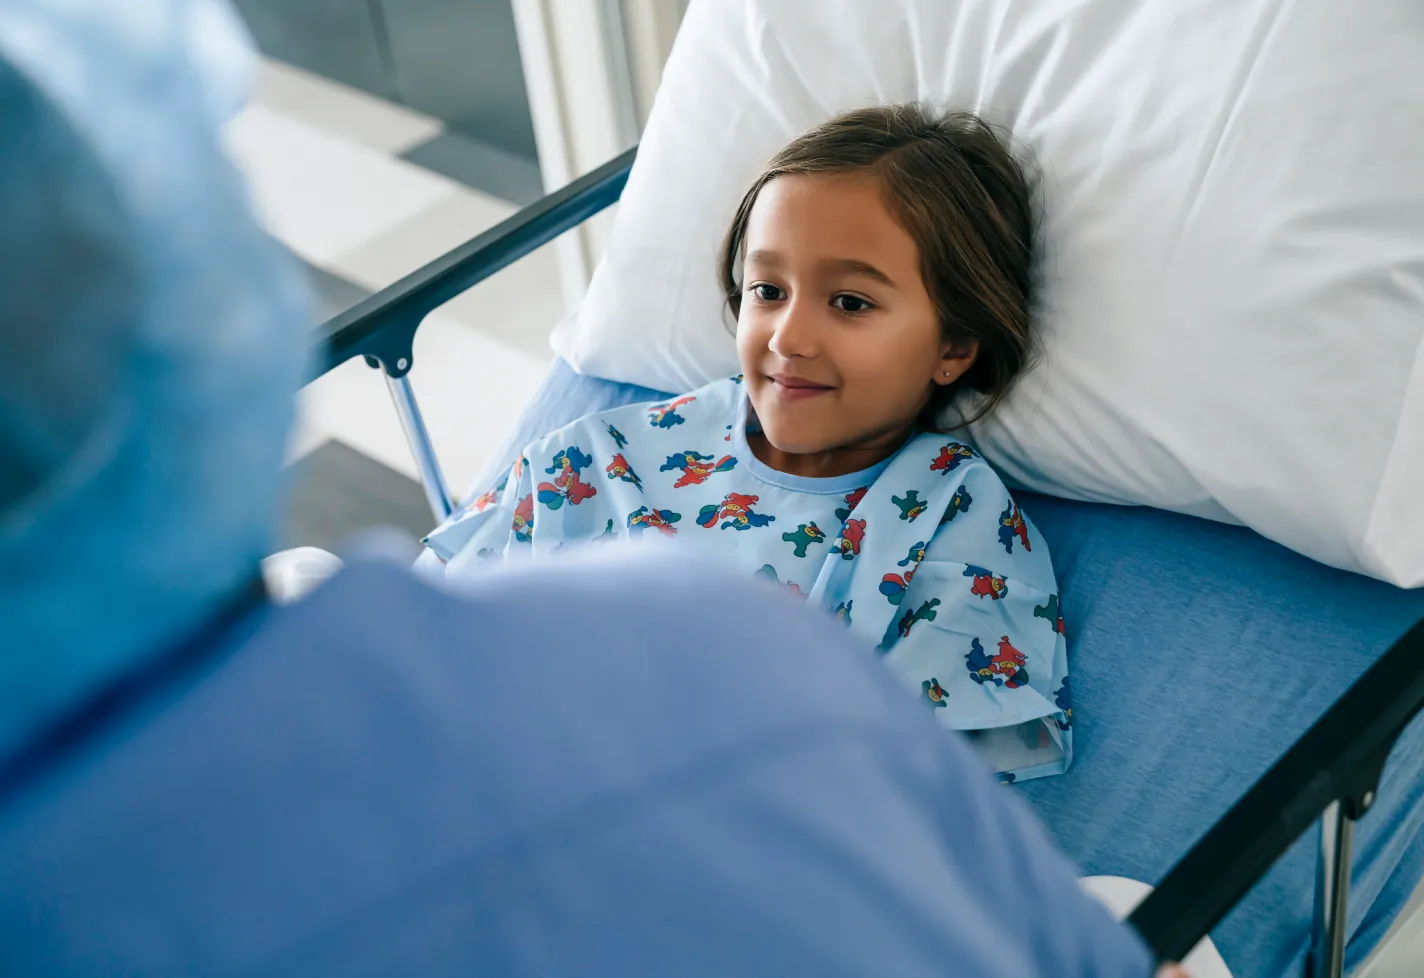  A young child is lying down in a hospital bed and looking up at a healthcare provider. 